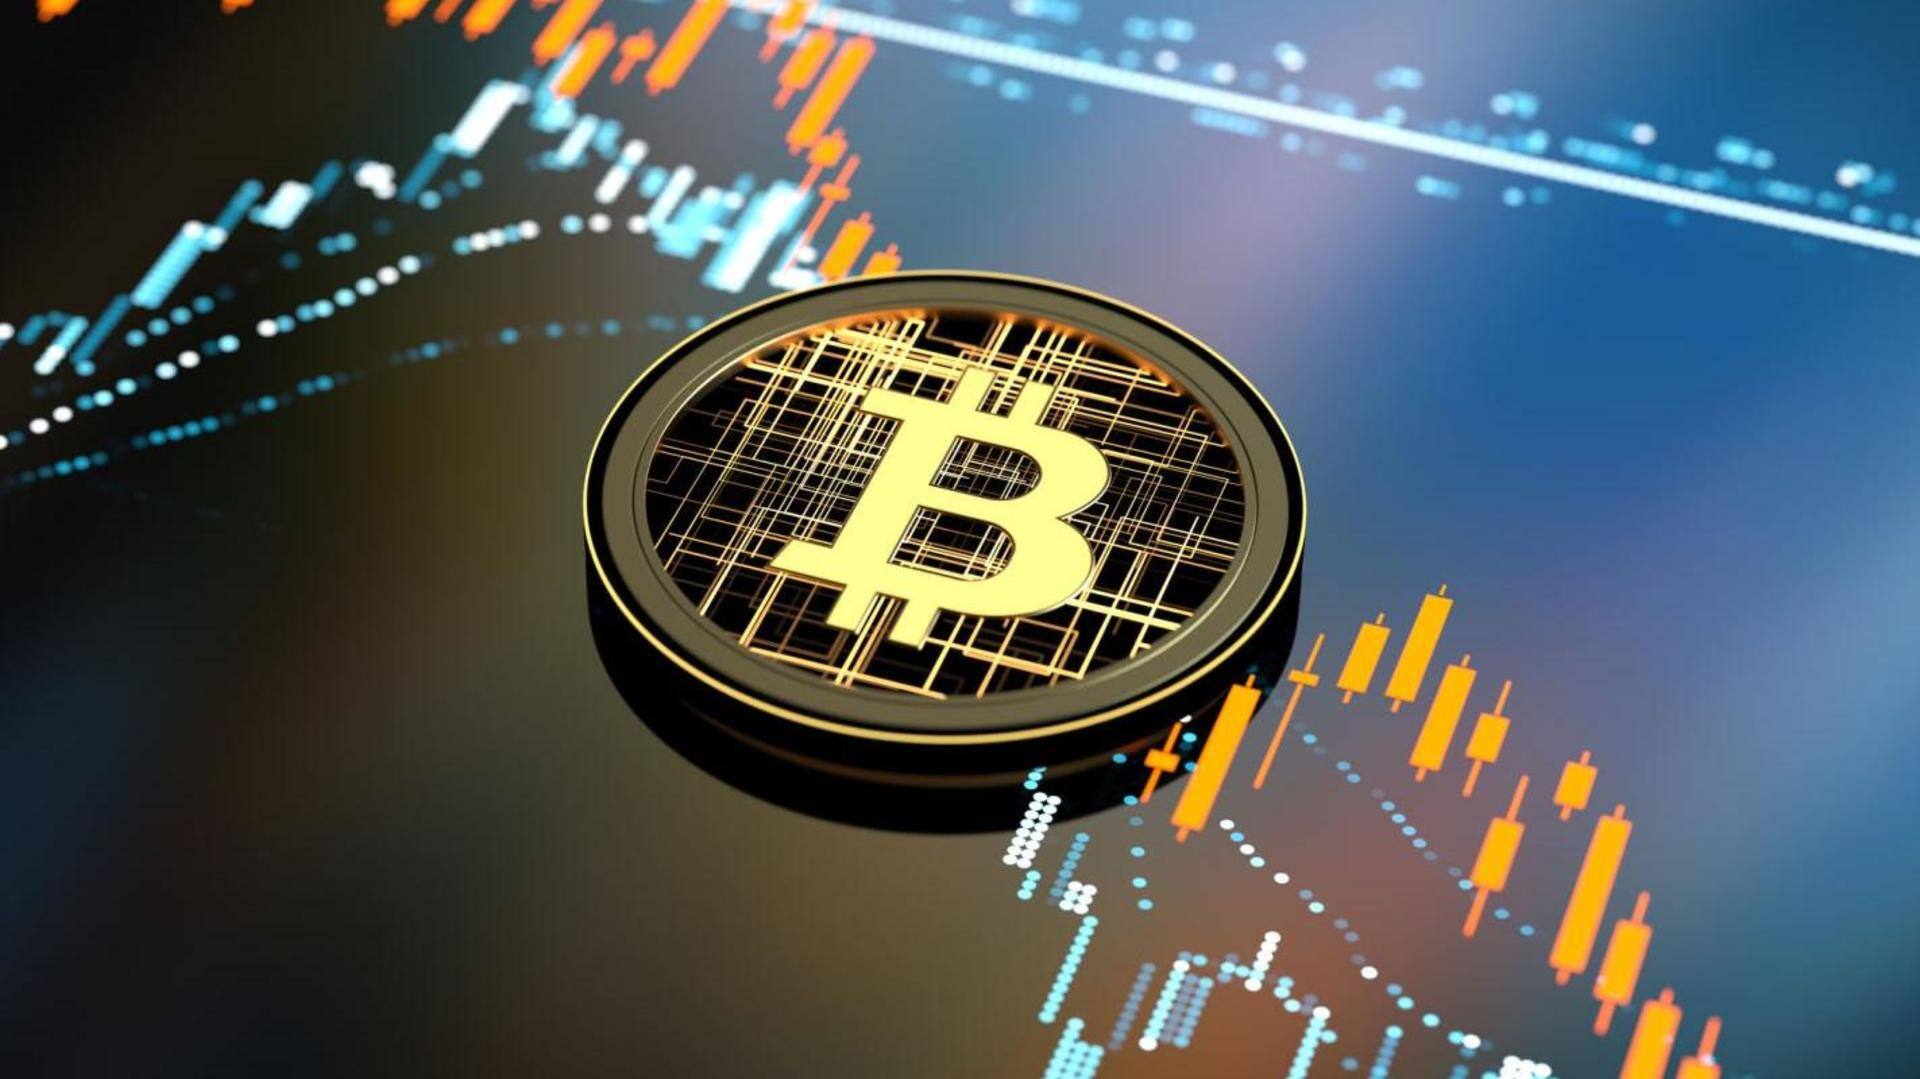 Cryptocurrency prices today: Check rates of Bitcoin, Ethereum, Tether, Solana